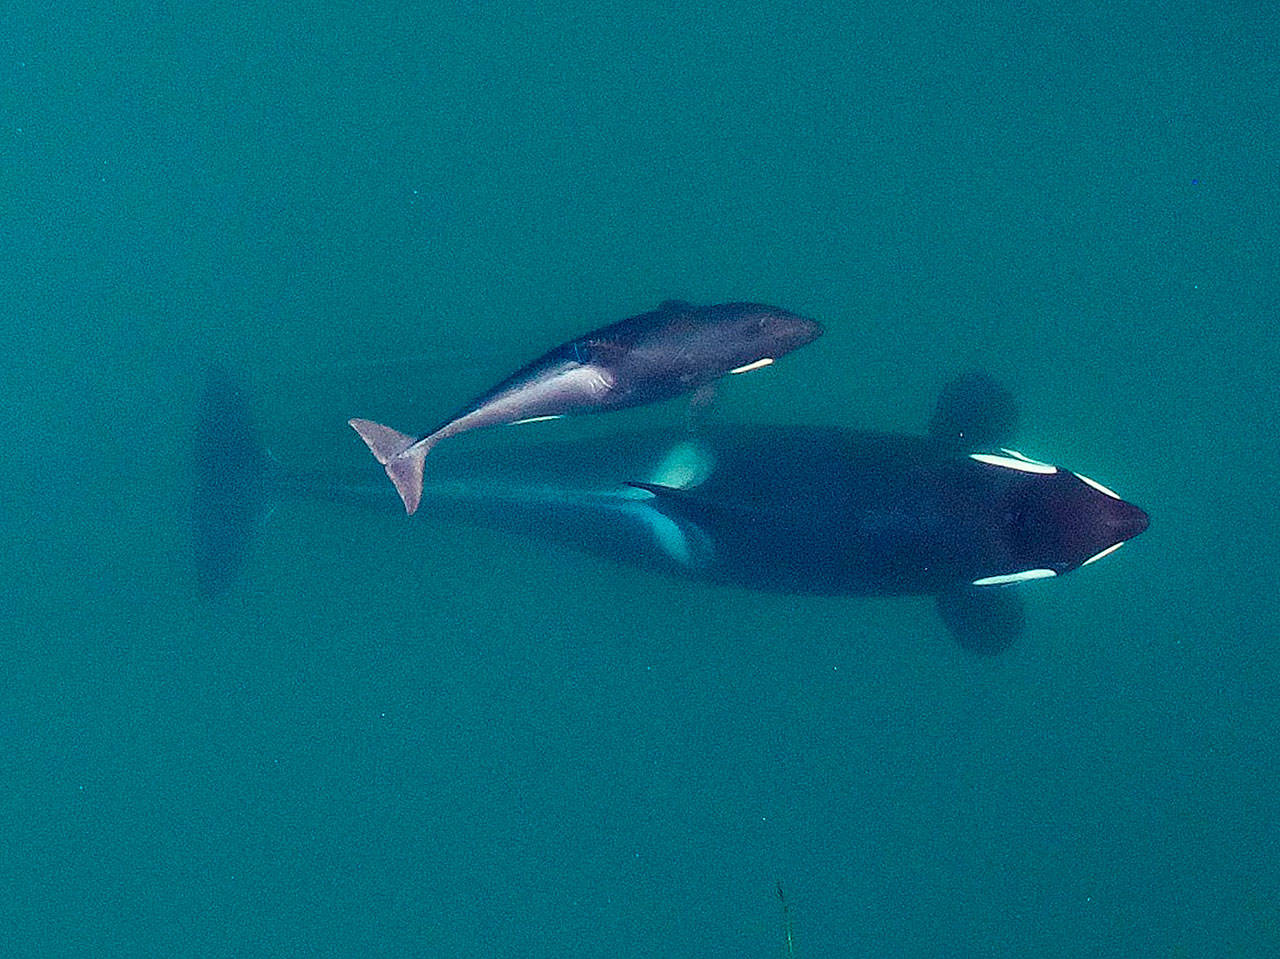 This September 2015 photo provided by NOAA Fisheries shows an aerial view of adult female Southern Resident killer whale J16 swiming with her calf, J50. (NOAA Fisheries/Vancouver Aquarium via AP)